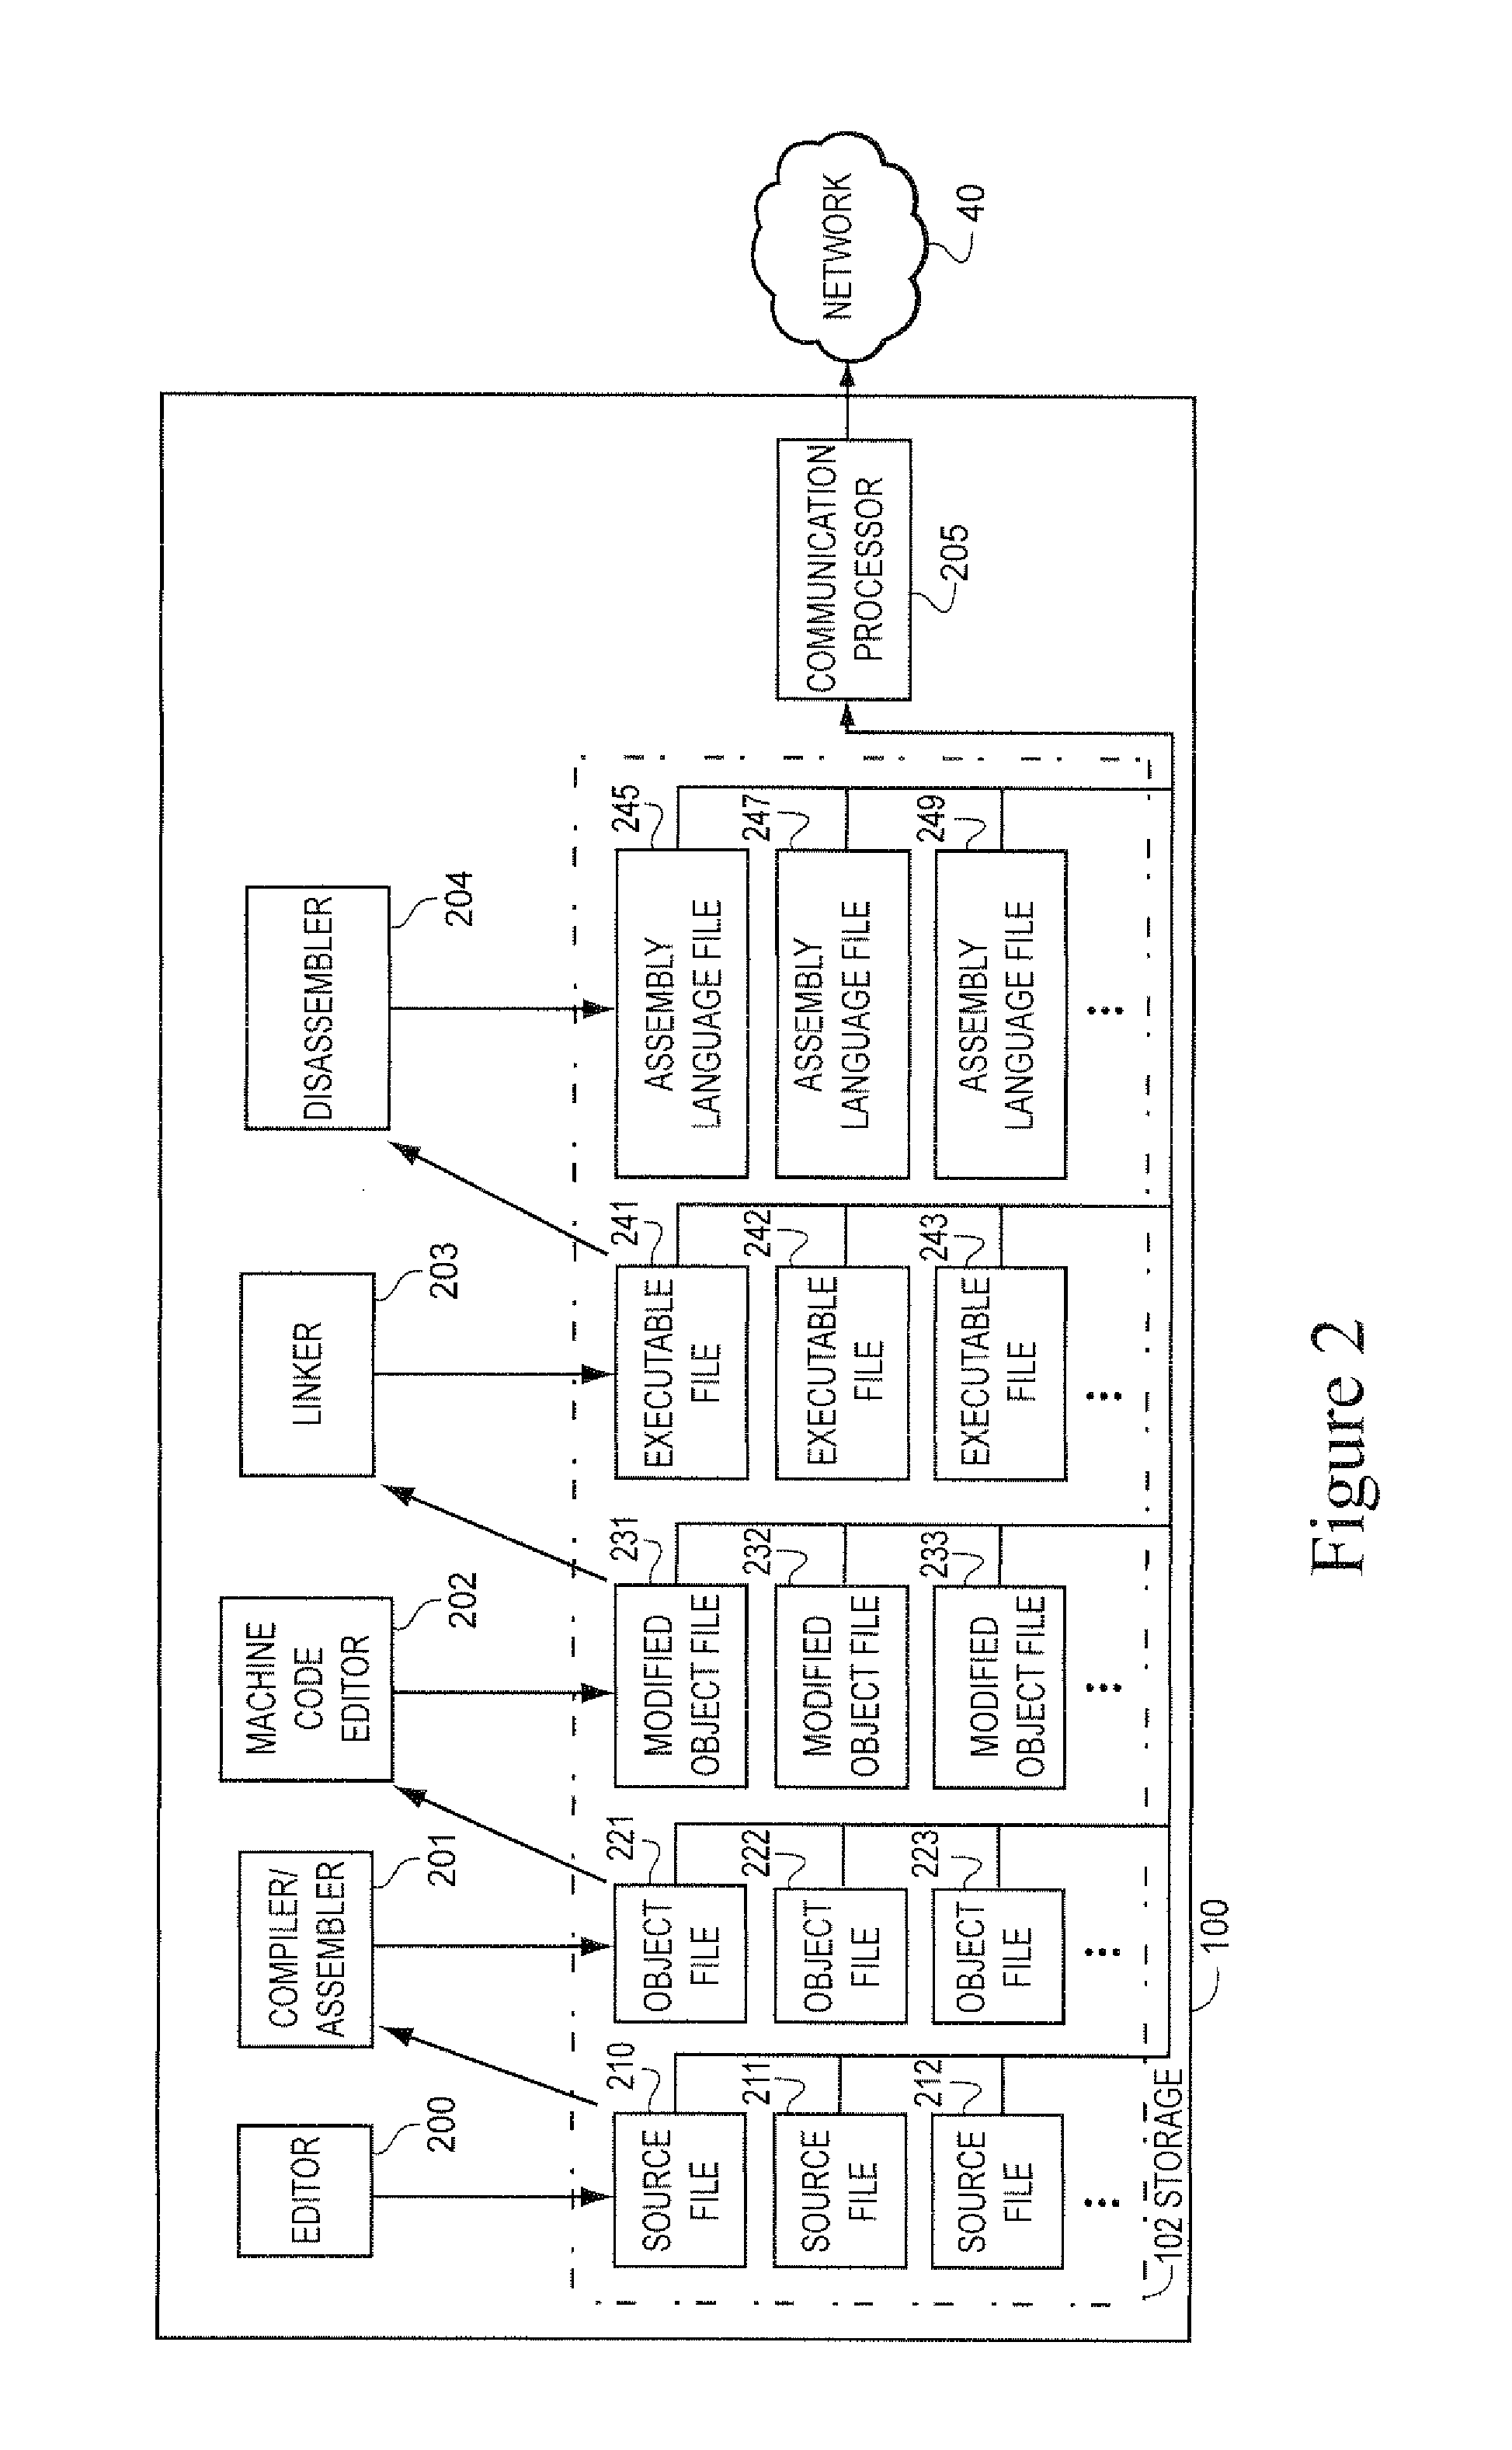 Method and apparatus for enhancing comprehension of code time complexity and flow